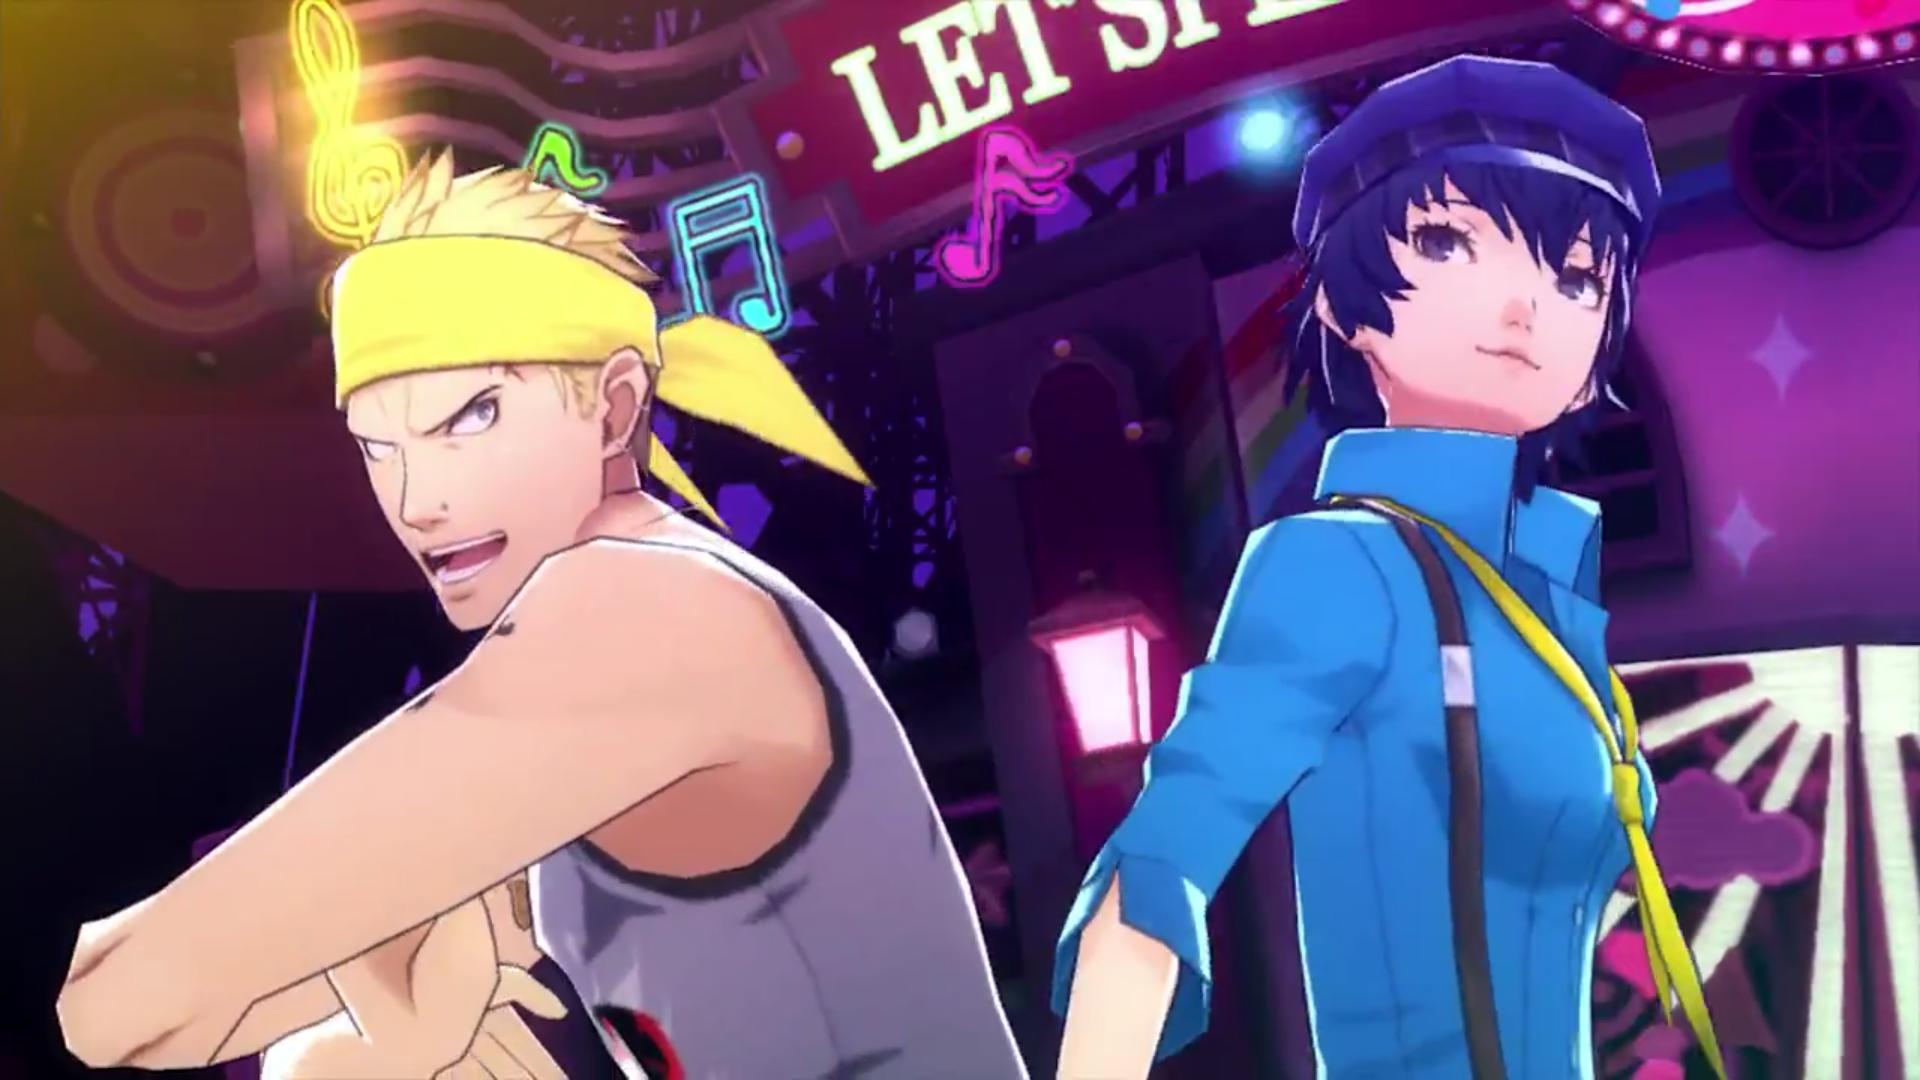 Kanji Shows Off His Manly Dance Moves in P4D’s New Character Clip